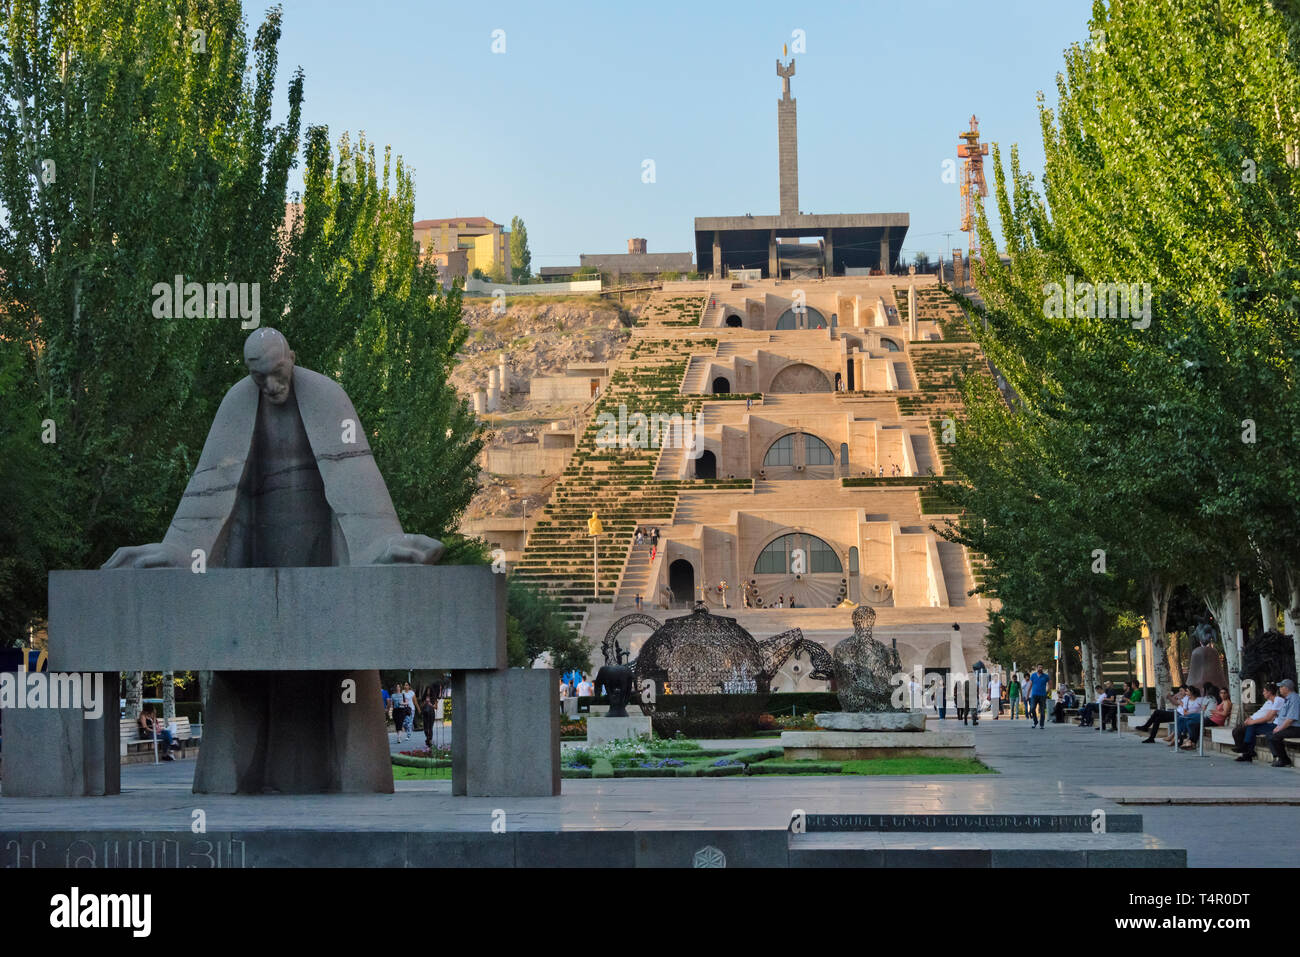 Monument to Alexander Tamanian in Cafesjian Center for the Arts, the Sculpture Park in front of the Cascade, Yerevan, Armenia Stock Photo